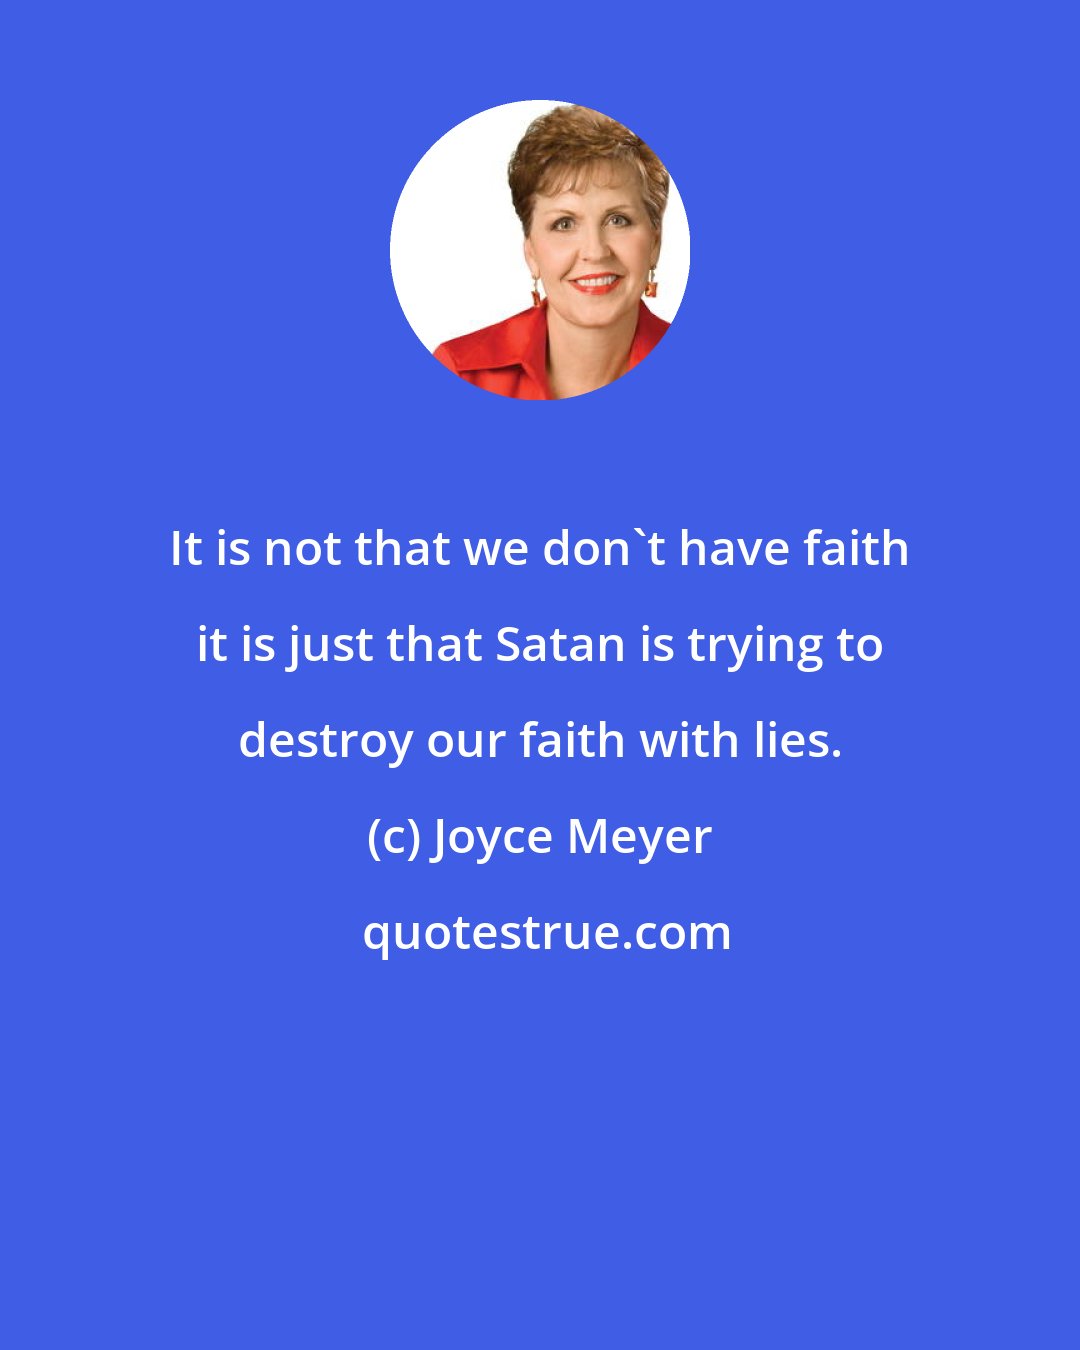 Joyce Meyer: It is not that we don't have faith it is just that Satan is trying to destroy our faith with lies.